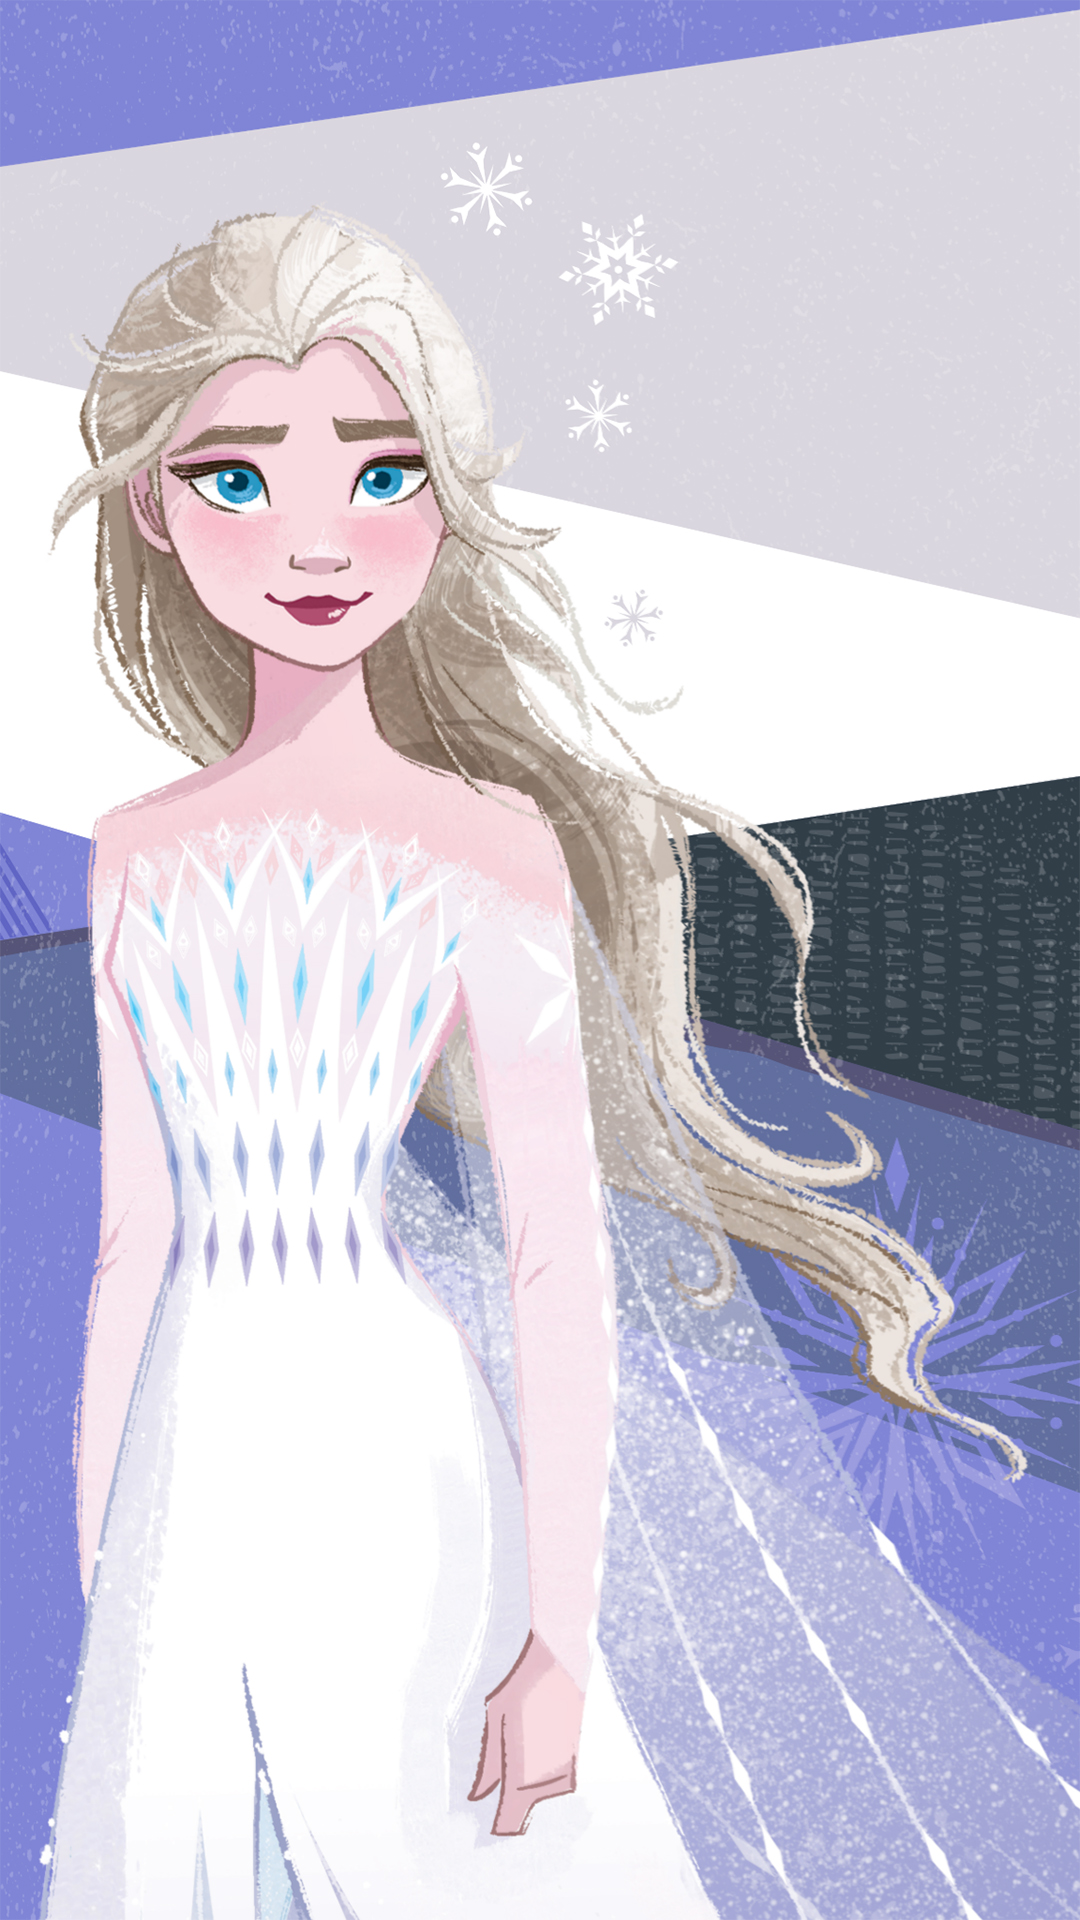 new Frozen 2 HD wallpaper with Elsa in white dress and her hair down and mobile